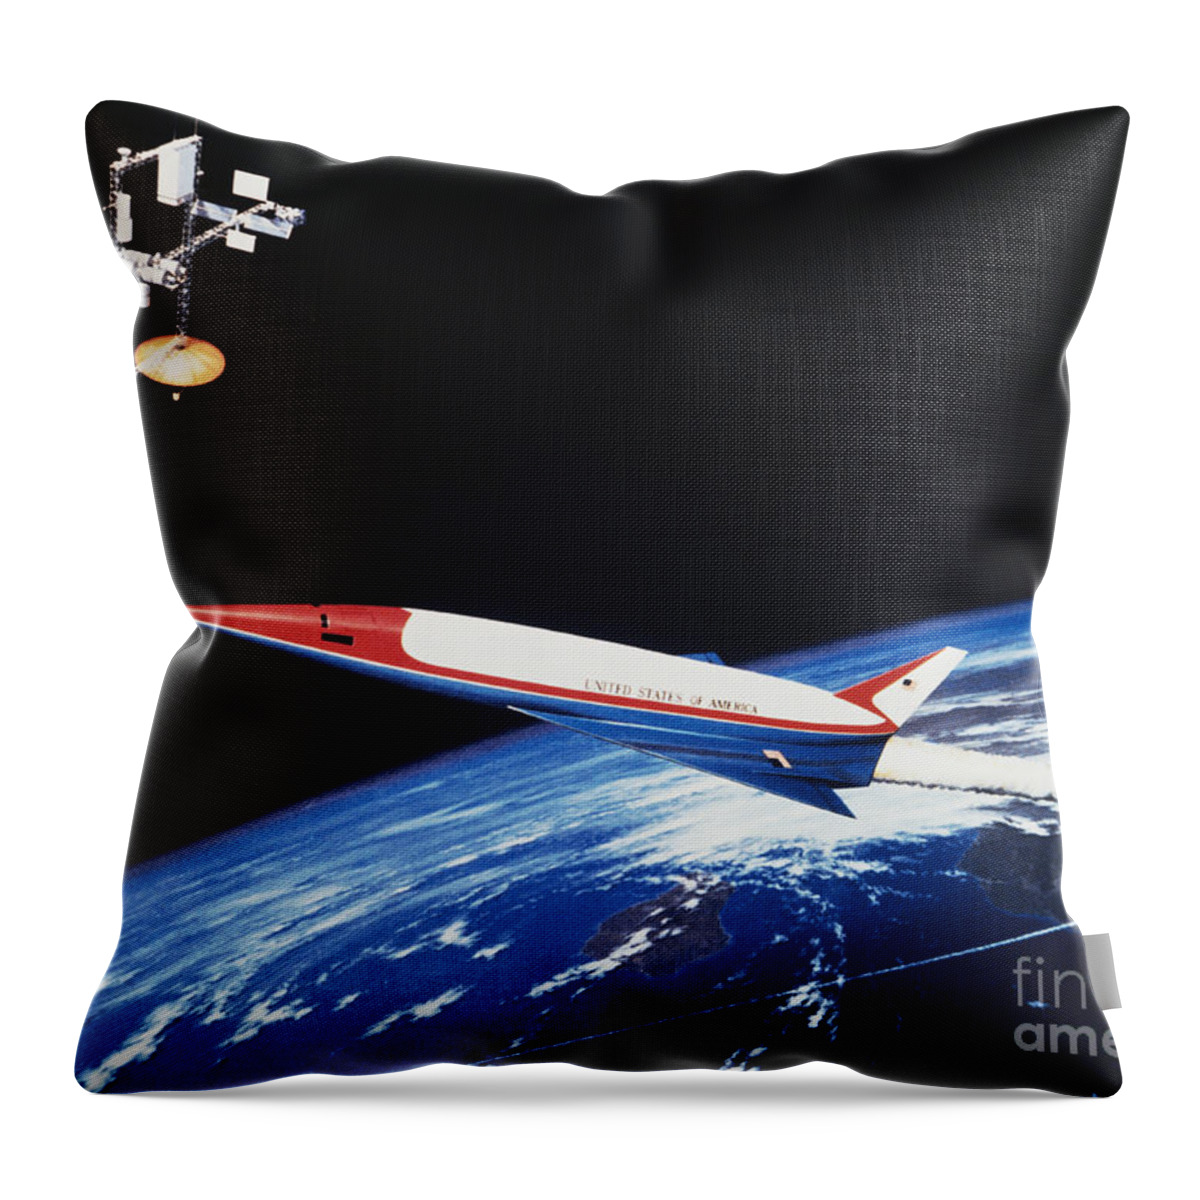 Art Throw Pillow featuring the photograph Rockwell X-30 by Science Source